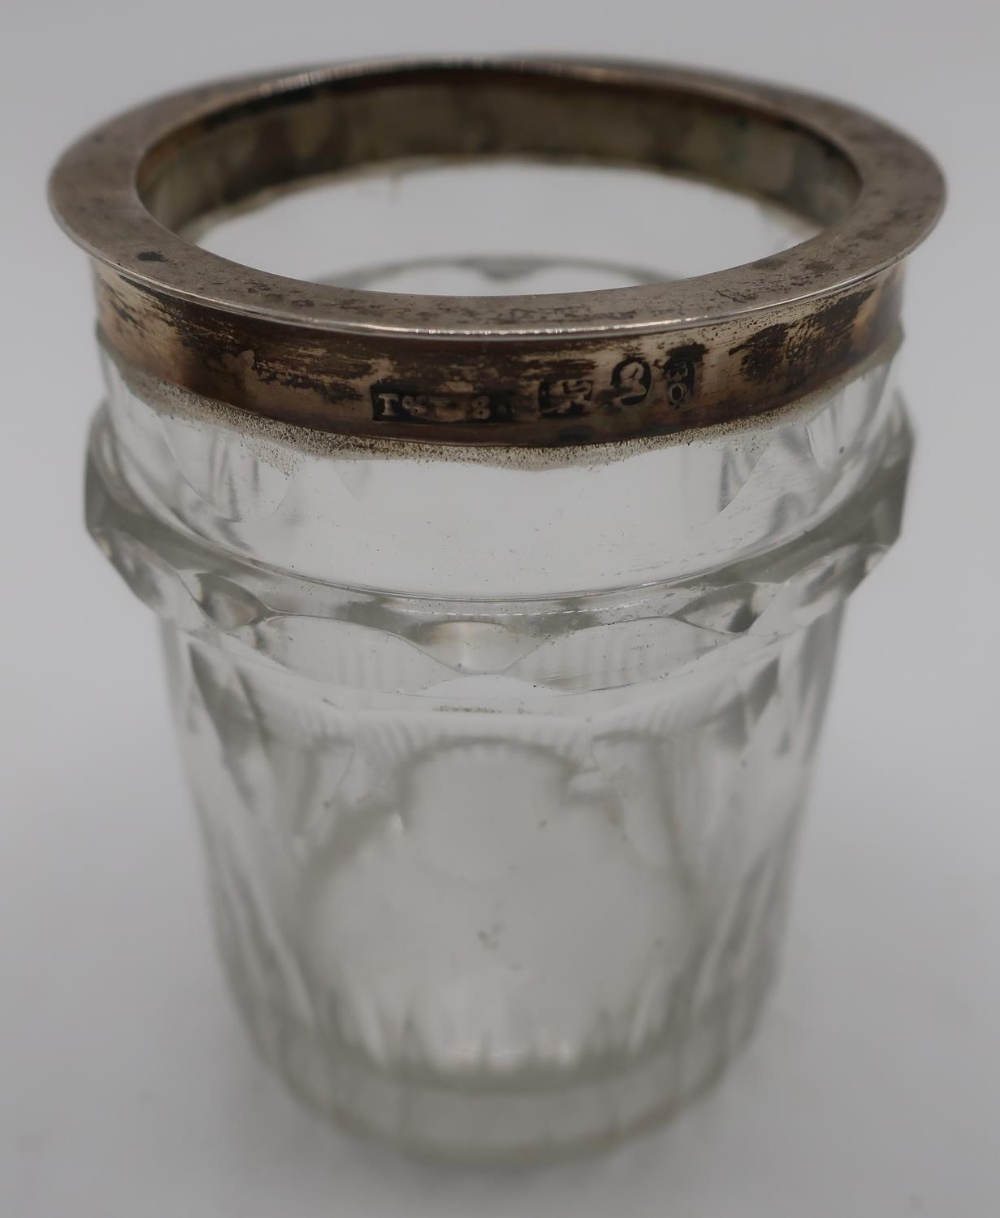 Hallmarked silver ink well, Birmingham 1915, a silver capstan ink well with inlaid tortoiseshell - Image 4 of 4